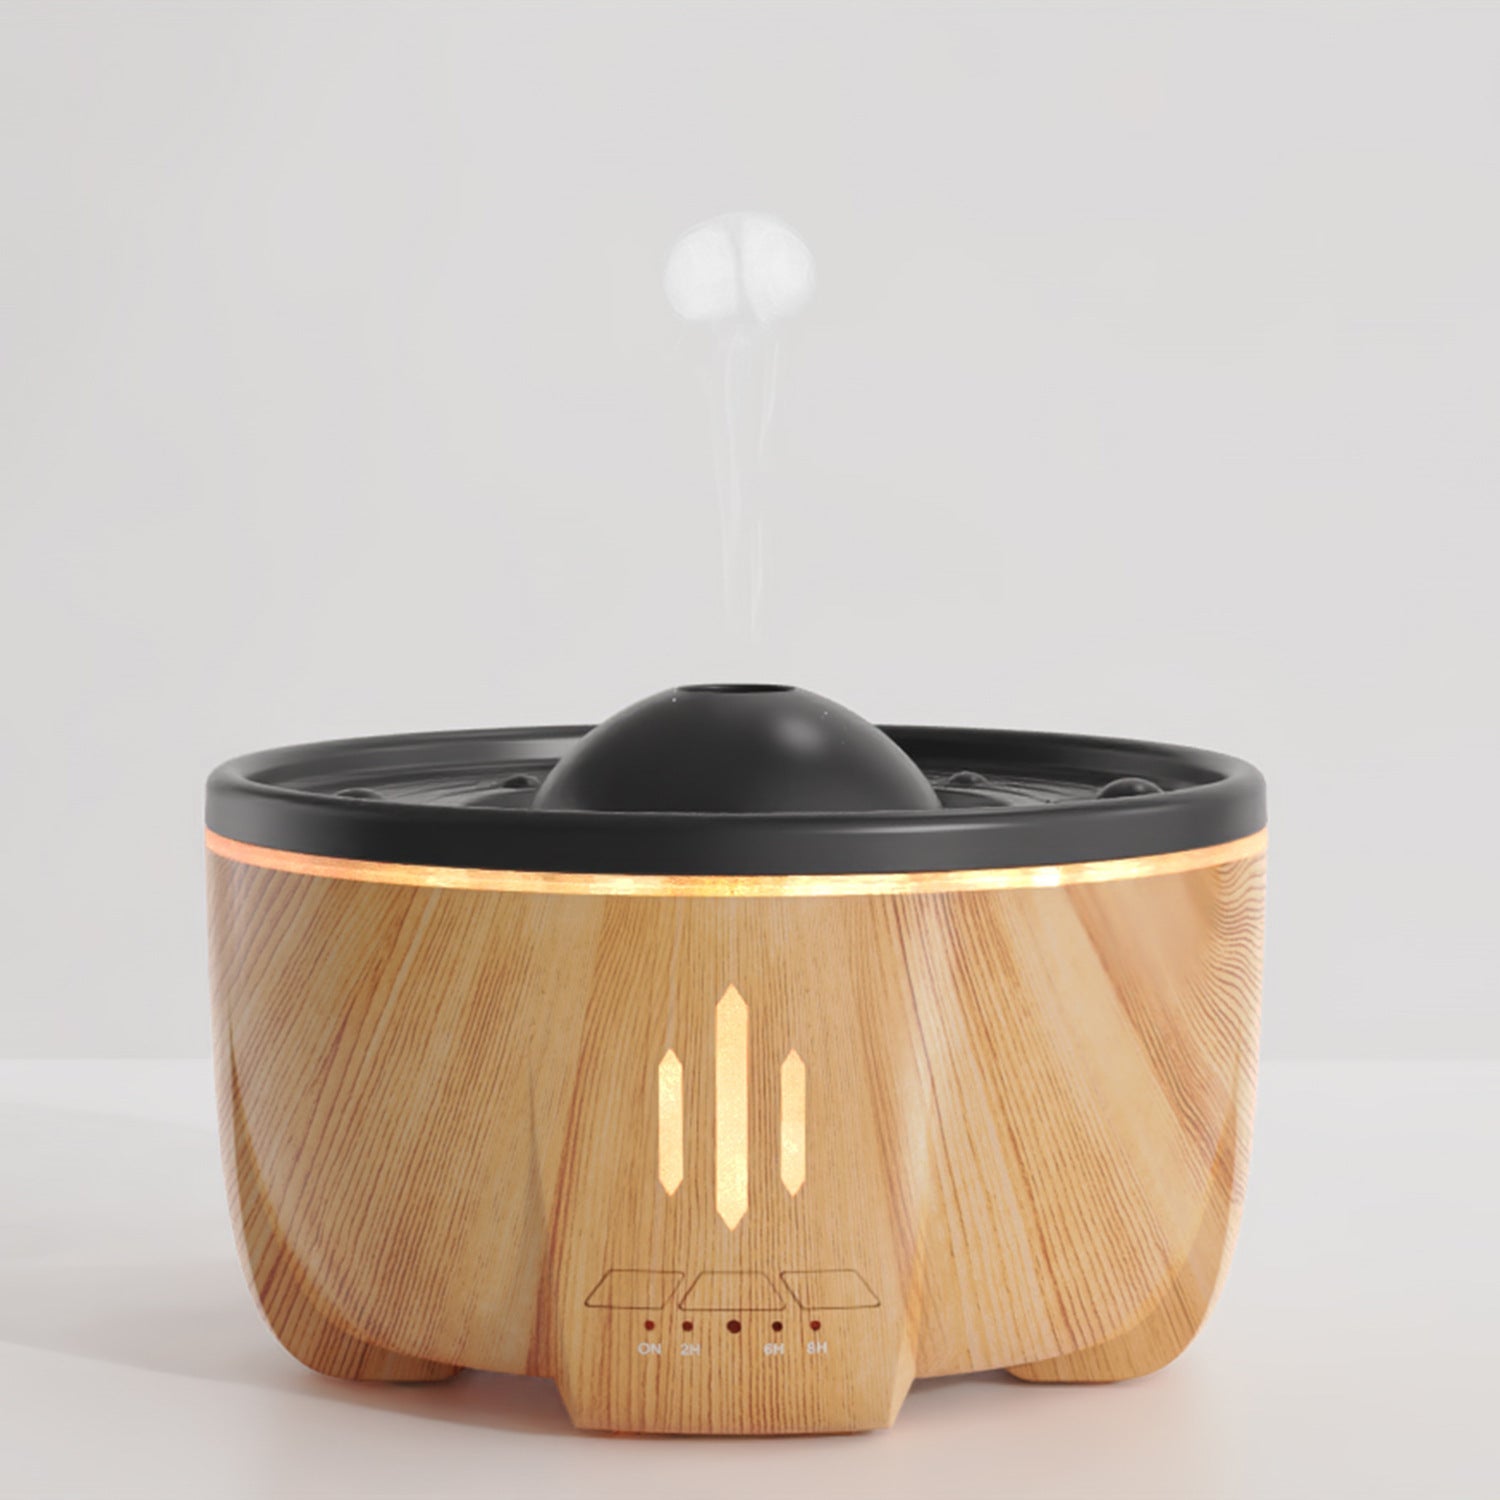 Aroma Diffuser and Humidifier: Create a Relaxing and Refreshing Atmosphere - Max&Mark Home Decor